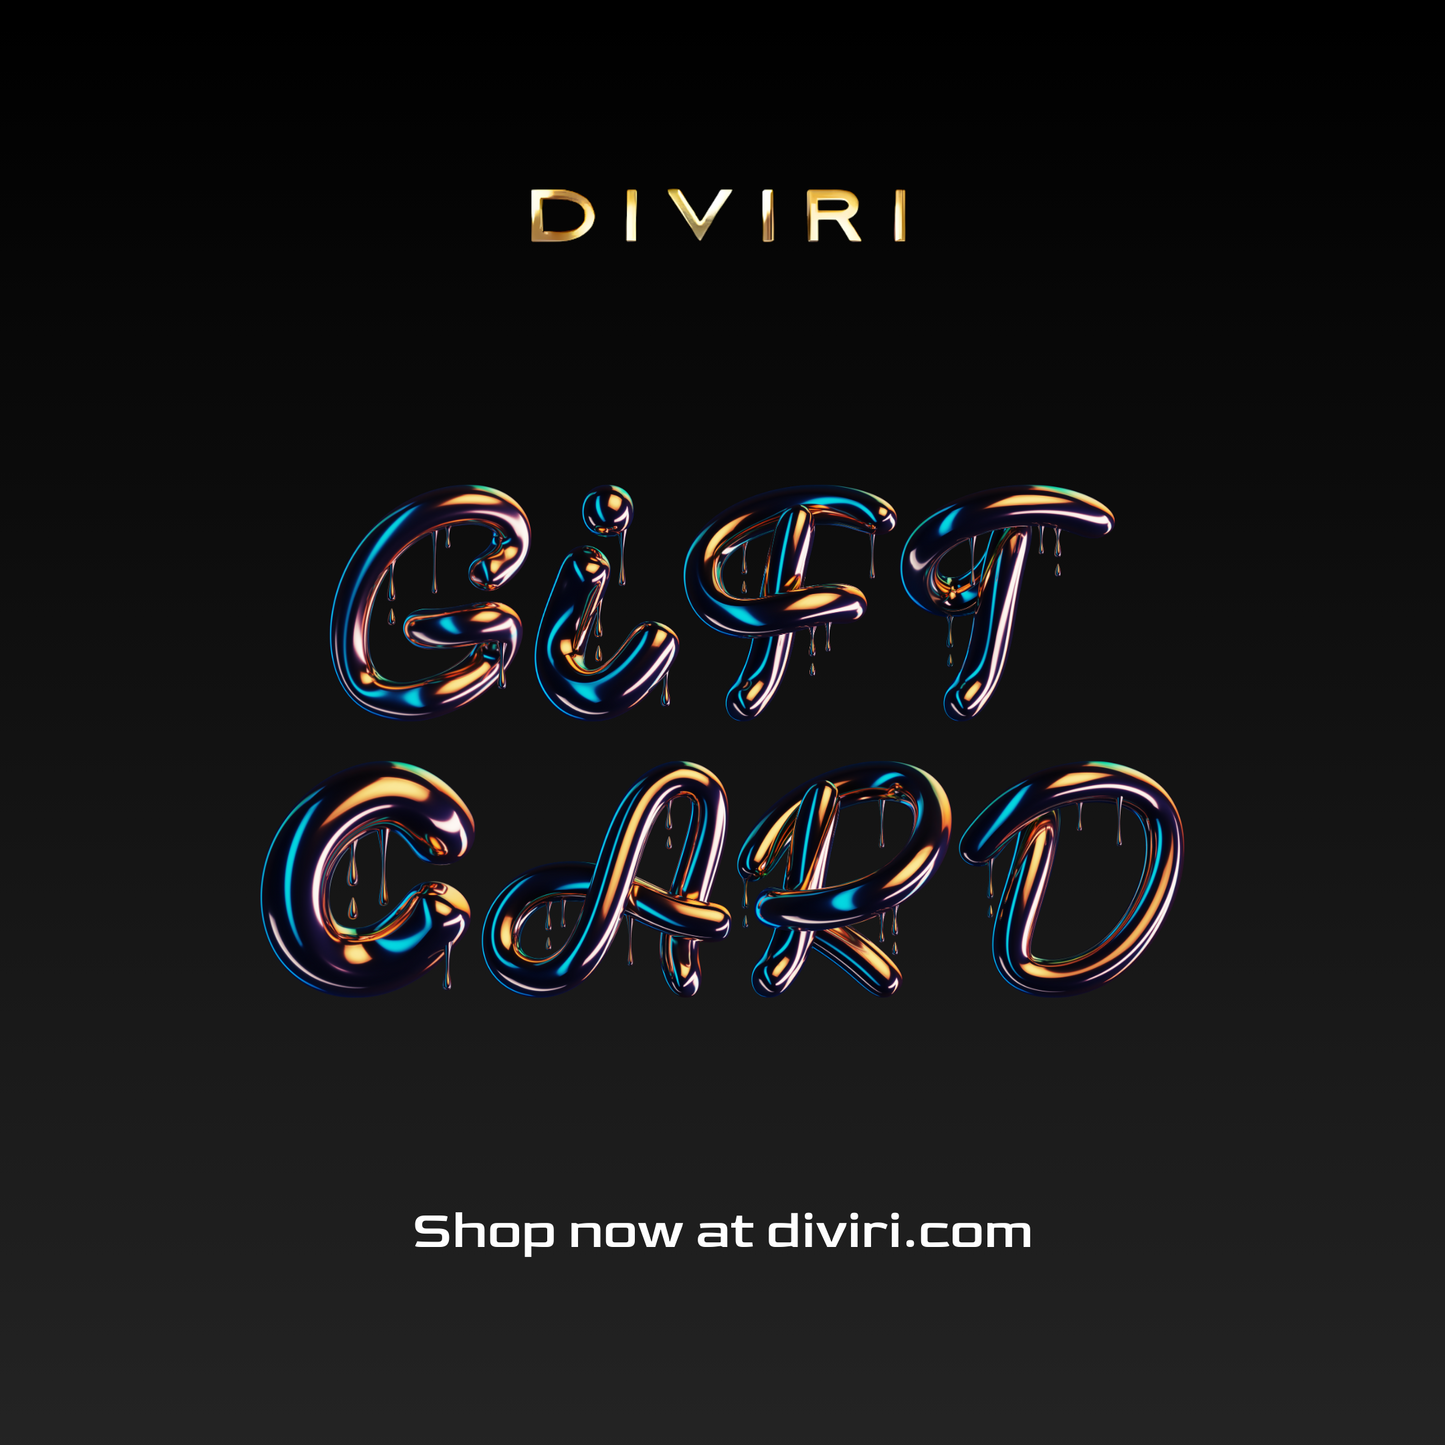 Official DIVIRI Gift Cards